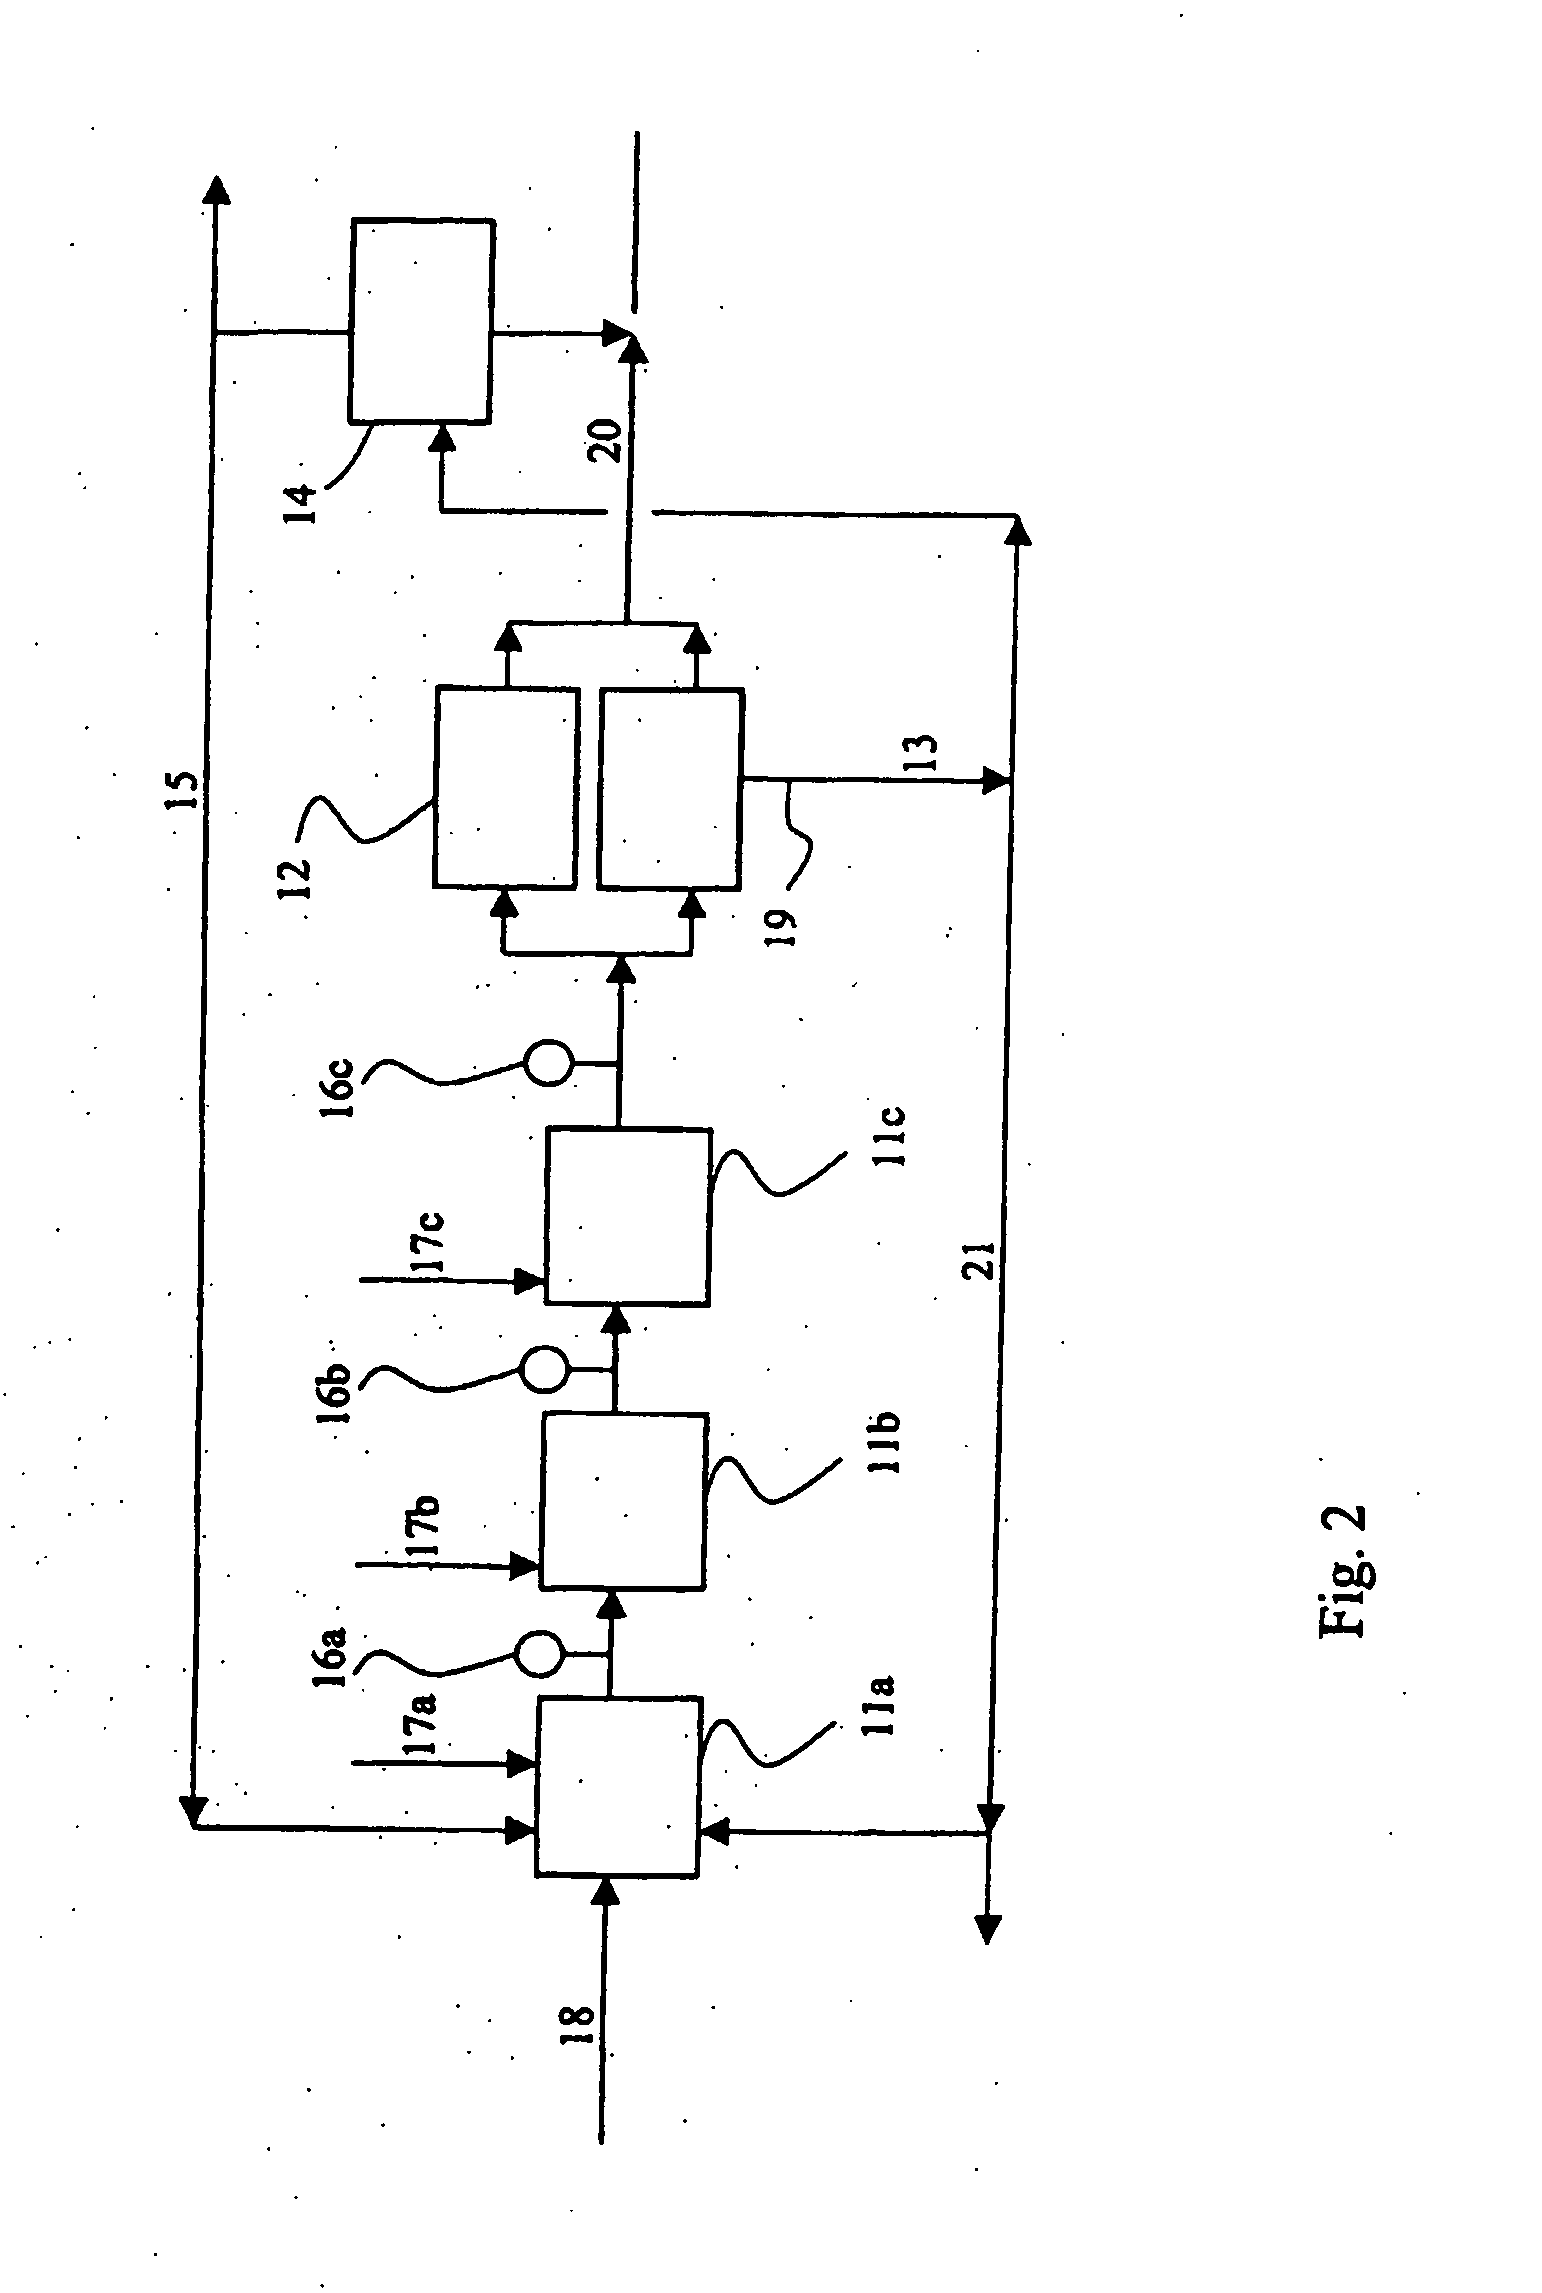 Method and Apparatus for Controlling Metal Separation